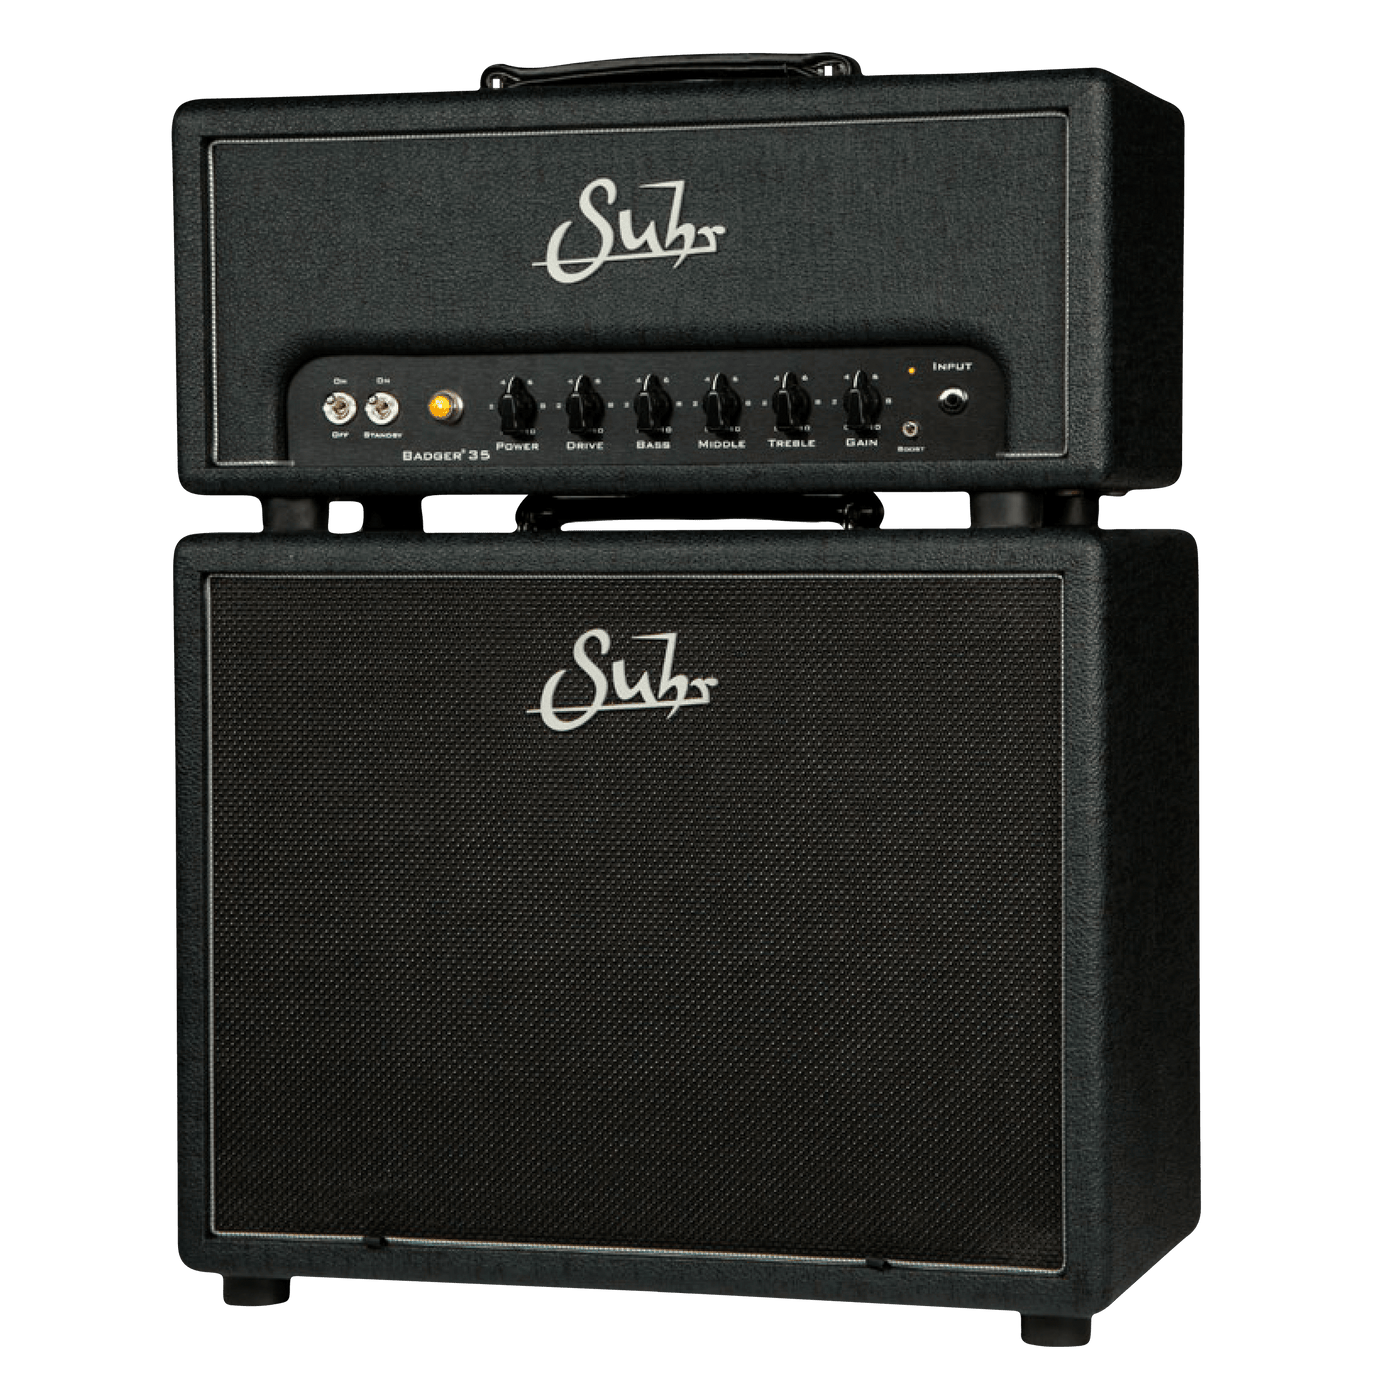 Suhr Badger 18 Head - $2299990 - Gearhub - In 2005, we set out to design a series of portable, hand built, all-tube amplifiers. These amplifiers would be easy to use and offer players a vast array of classic British tones and would fit right at home in virtually any recording or live performance environment. The result? In the Winter of 2006, the first Badger amplifier was born and the rest is history. Since it’s debut, players, artists, and producers alike have made the Suhr Badger their go to amplifier fo